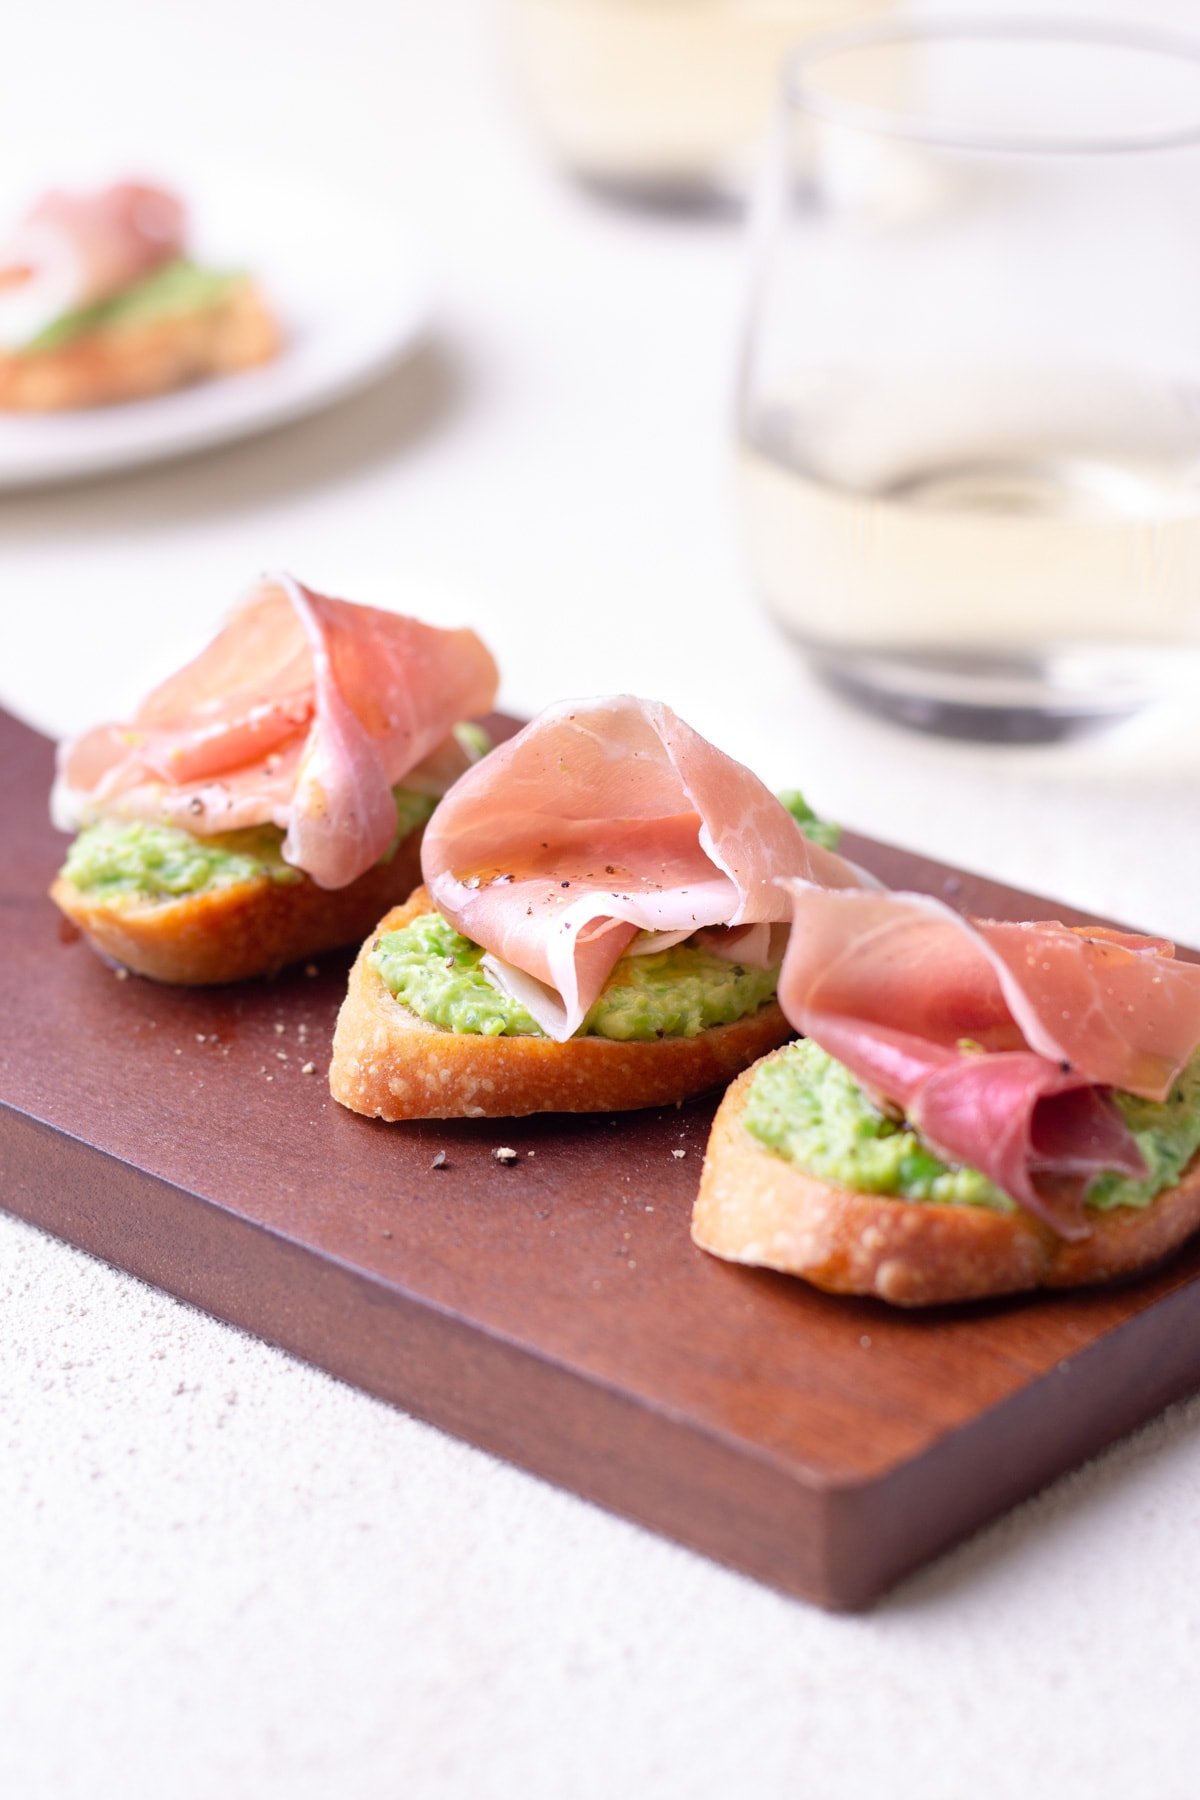 Crostini topped with pea-ricotta spread and prosciutto on a cutting board with white wine and a plate in the background.